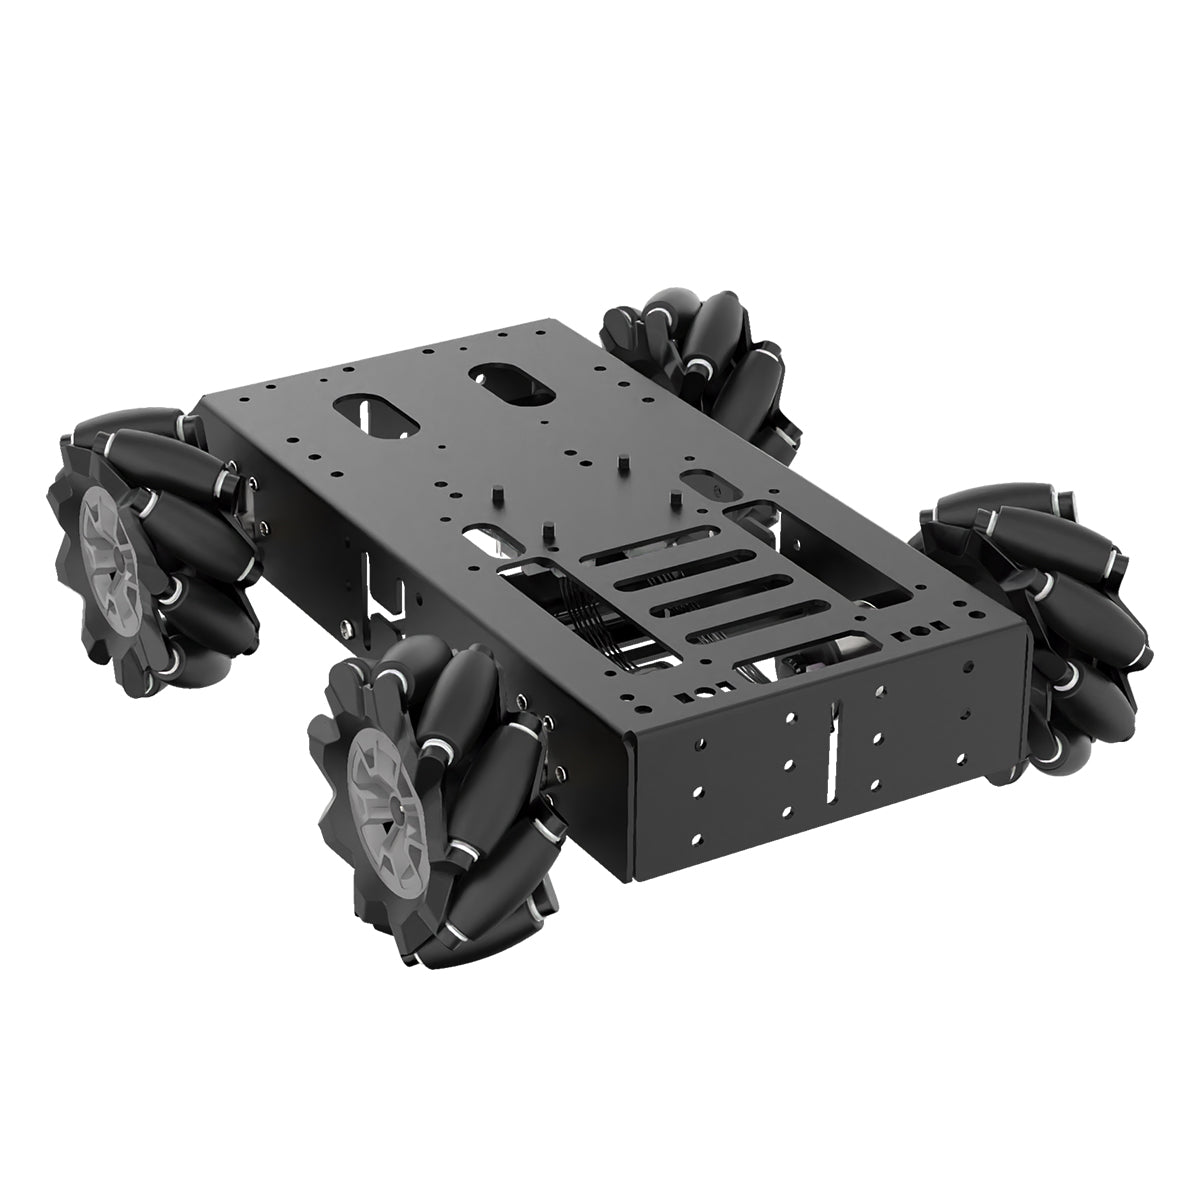 Hiwonder Large Metal 4WD Vehicle Chassis for Arduino/Raspberry Pi/ROS Robot with 8V Encoder Geared Motor